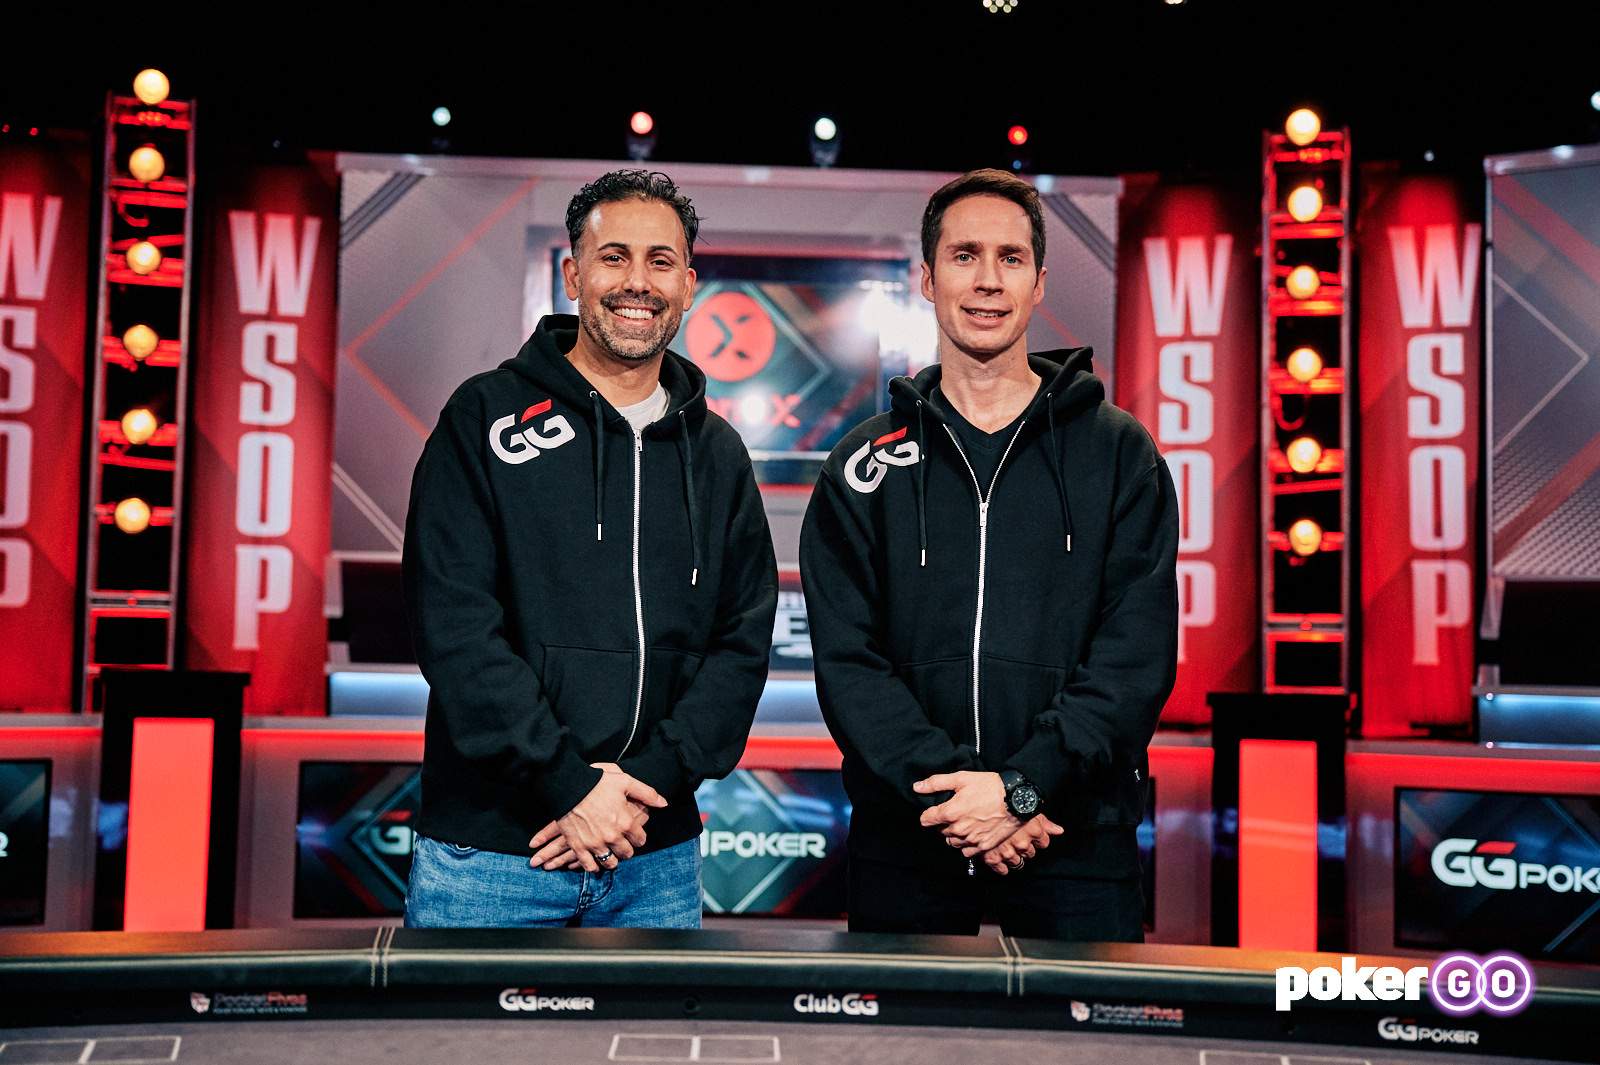 Ali Nejad and Jeff Gross Signed As New GGTeam Members